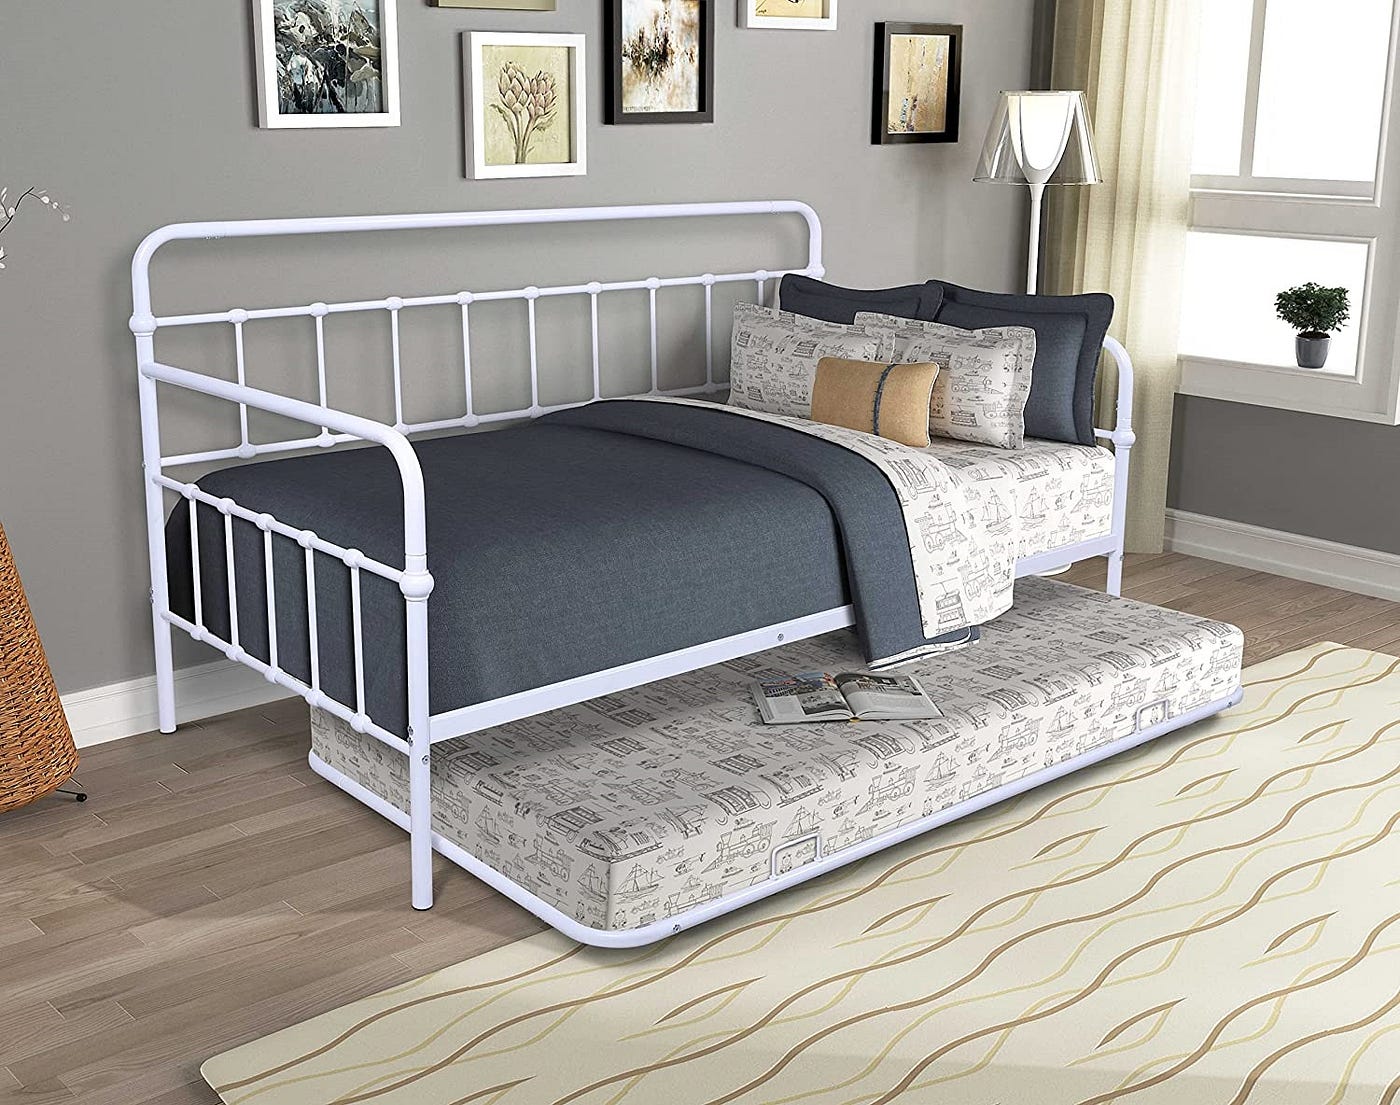 How to Make a Twin Bed Look Like a Couch | by Rob Sciubba | Medium